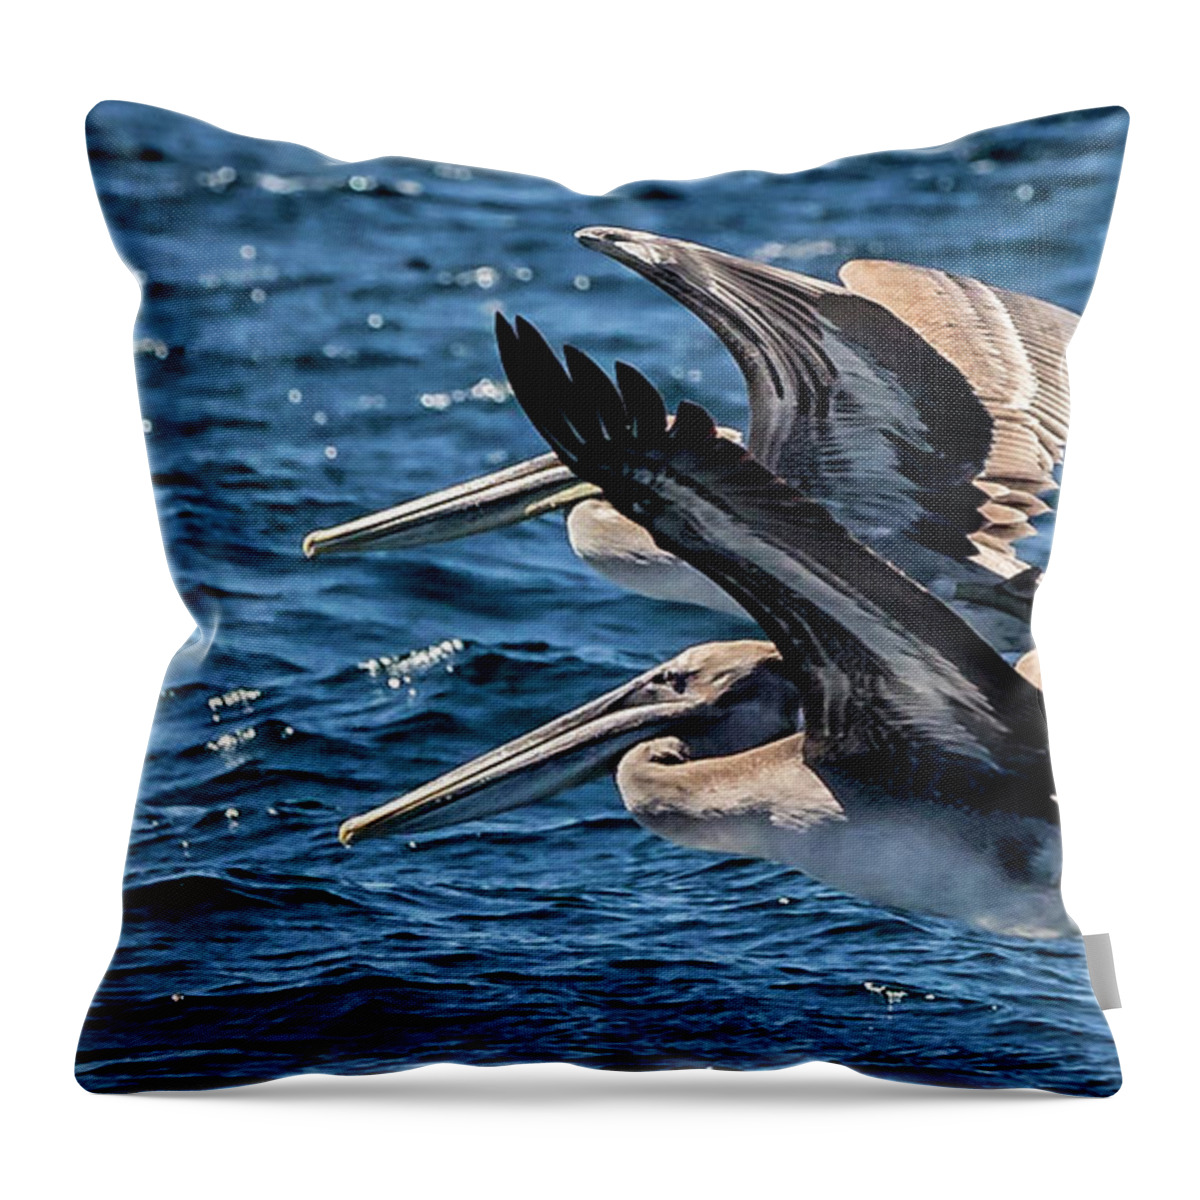 Brown Pelican Throw Pillow featuring the photograph Brown Pelicans by Endre Balogh